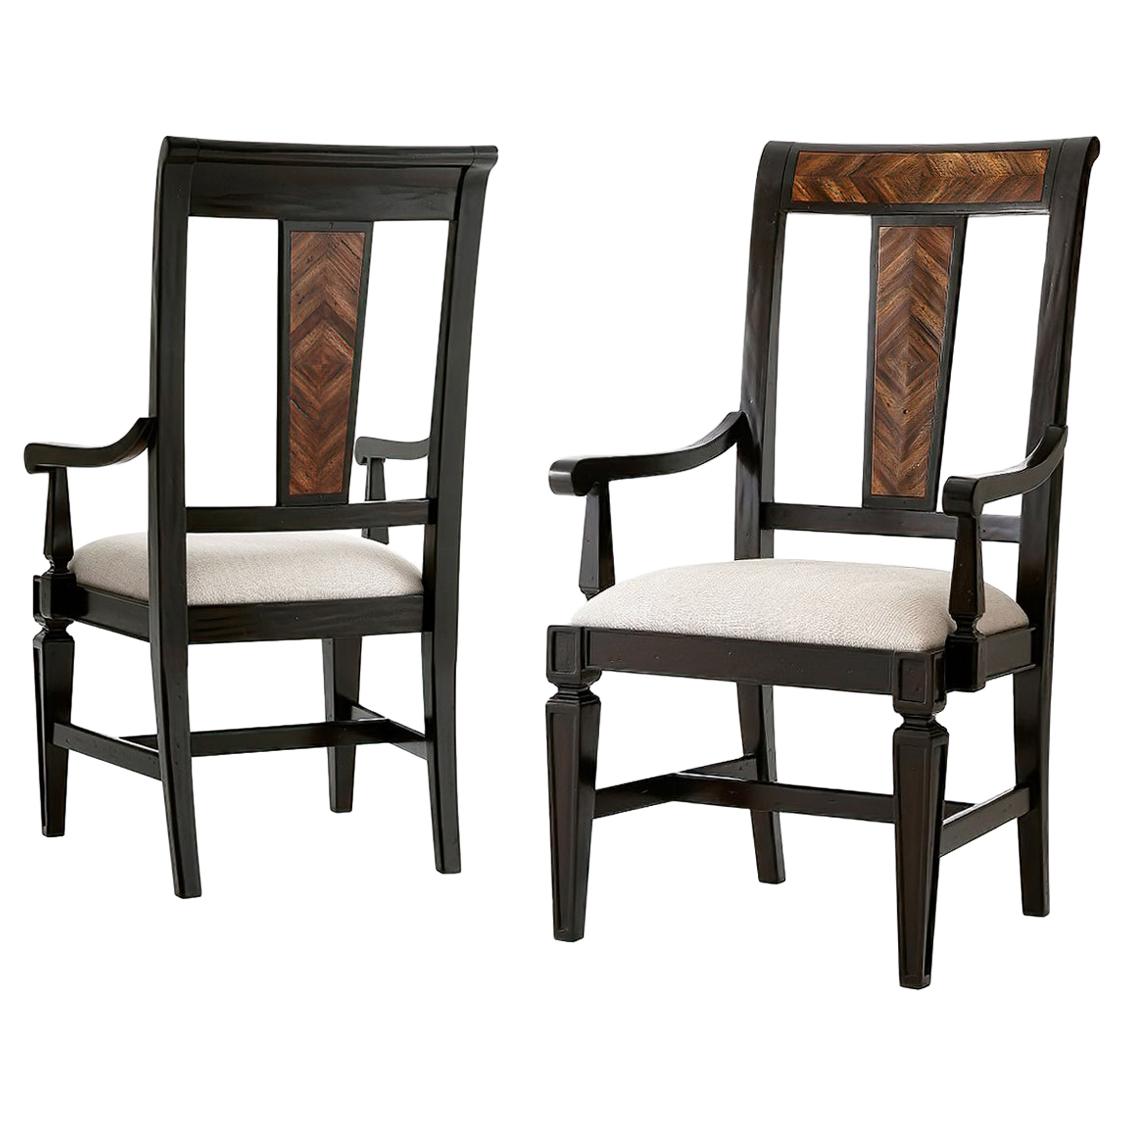 Italian Neo-Classic style provincial dining armchair with mahogany and acacia parquetry, an upholstered seat and raised on square tapered legs with stretchers.
Dimensions: 21